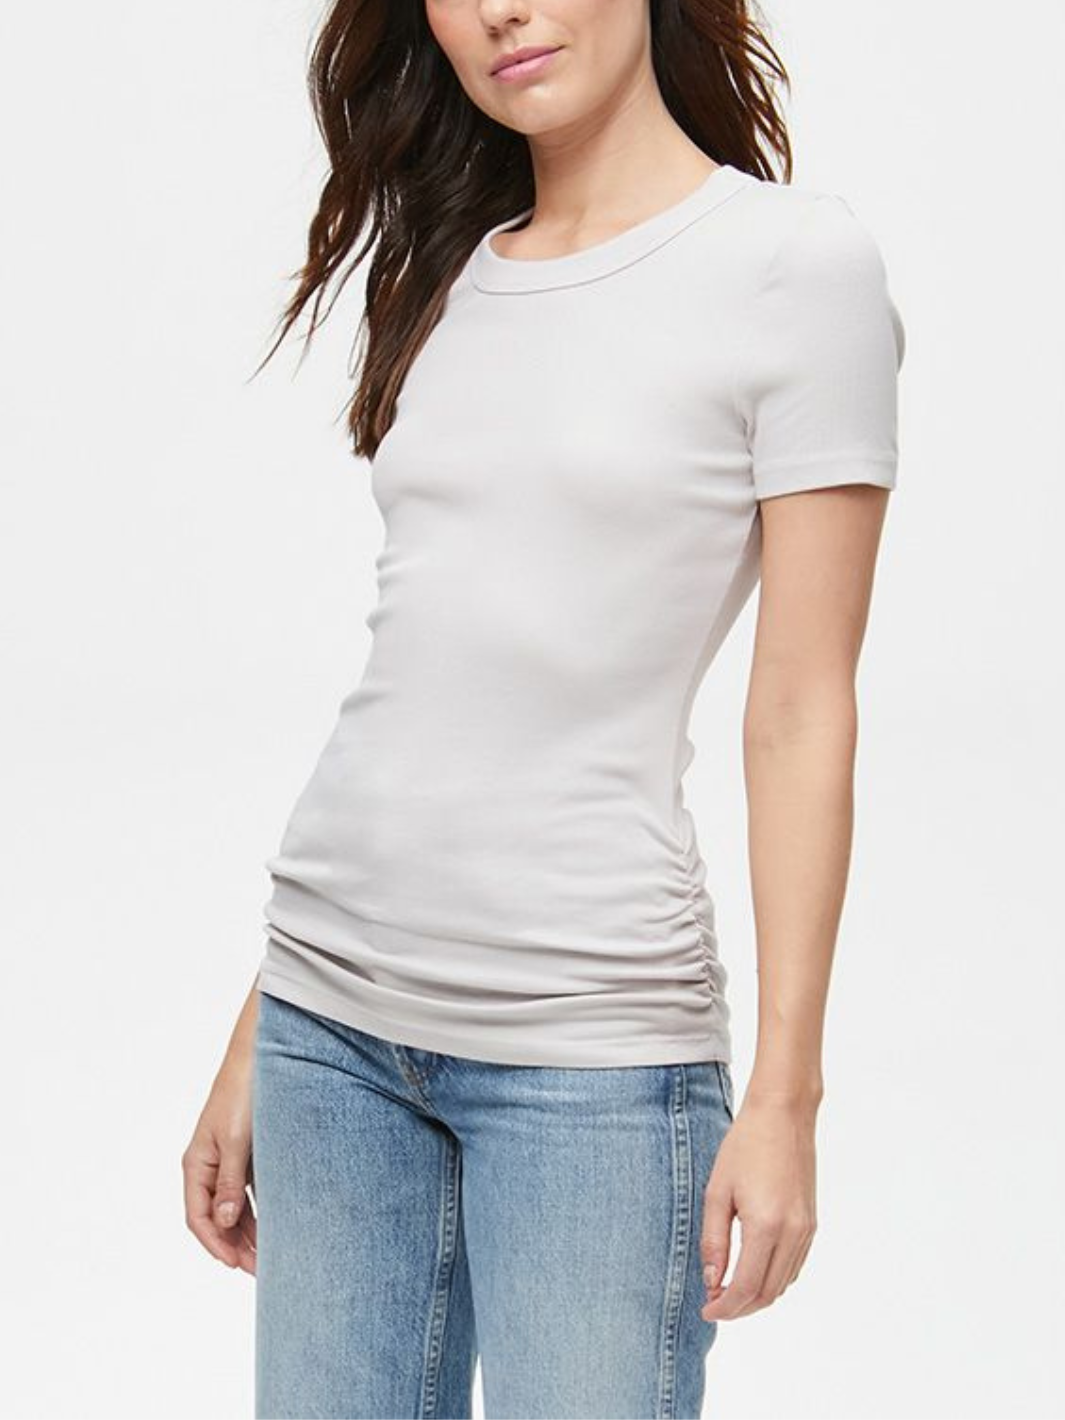 JOLIE RUCHED SIDE TEE IN HEATHER GREY - Romi Boutique